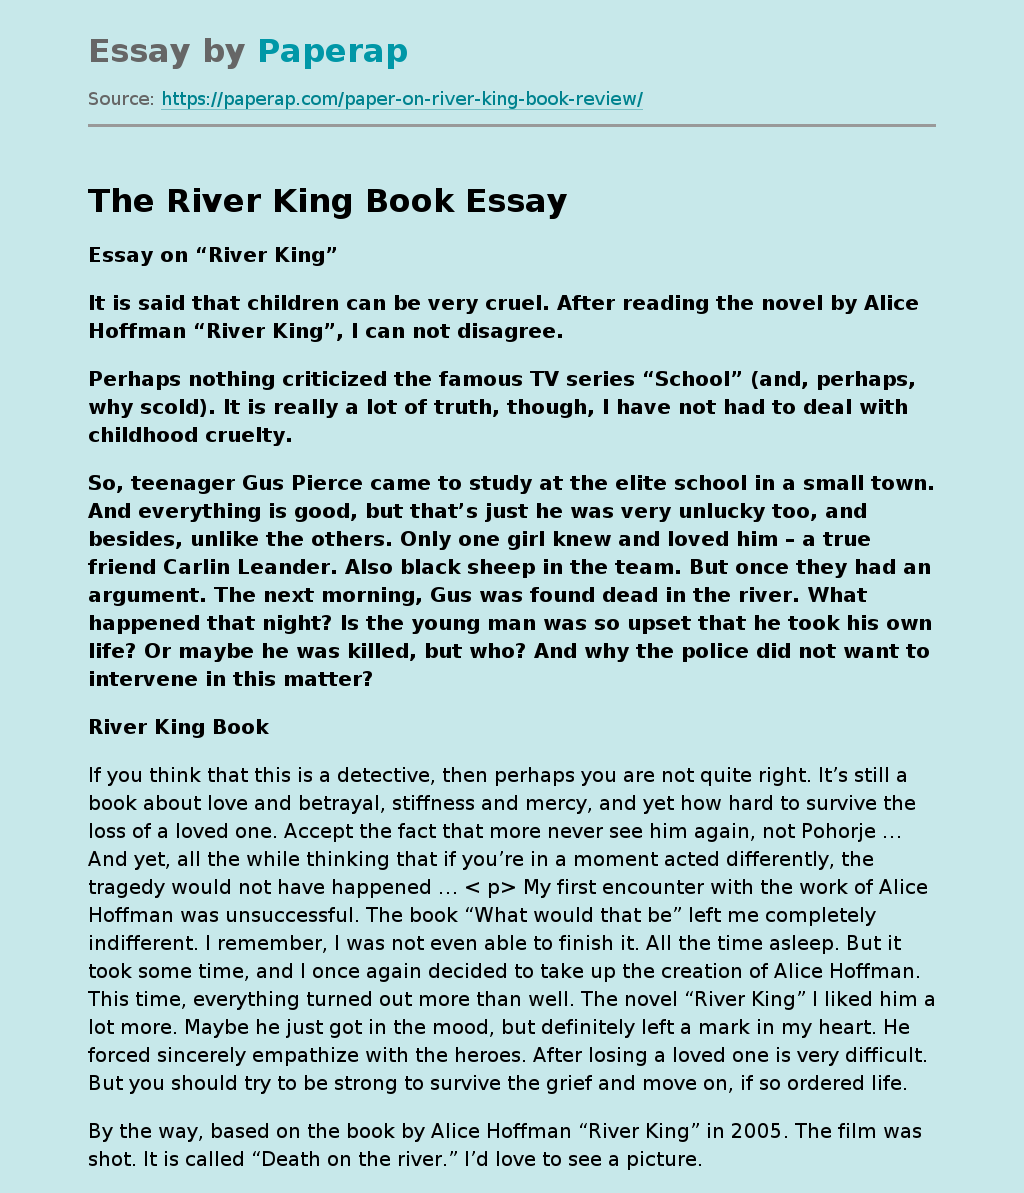 The River King Book